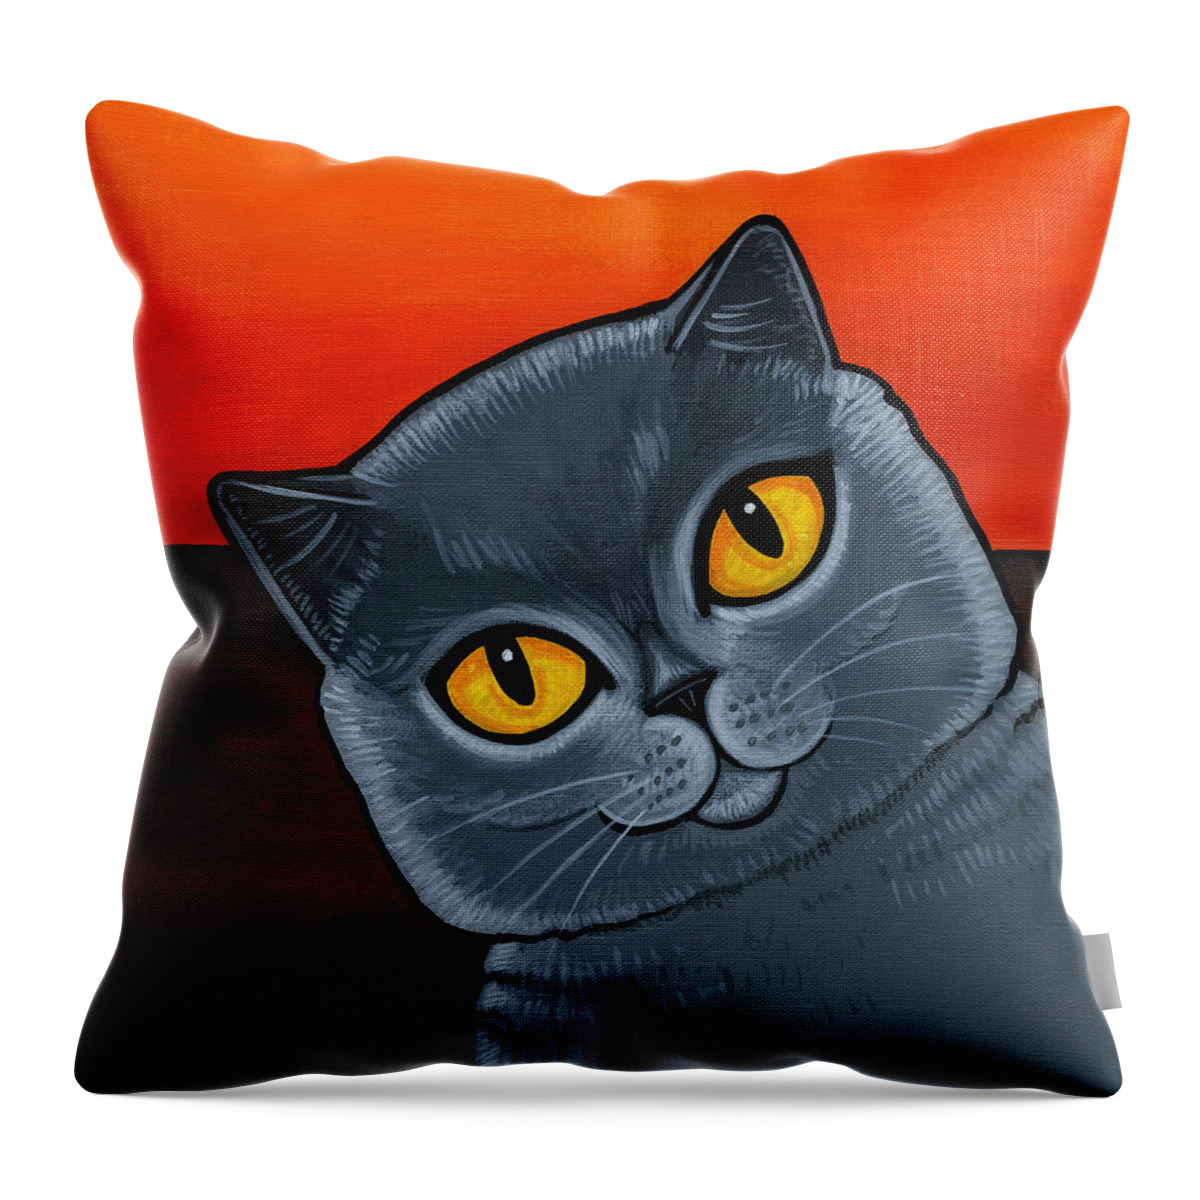 British Shorthair Cat Throw Pillow featuring the painting British Shorthair by Leanne Wilkes